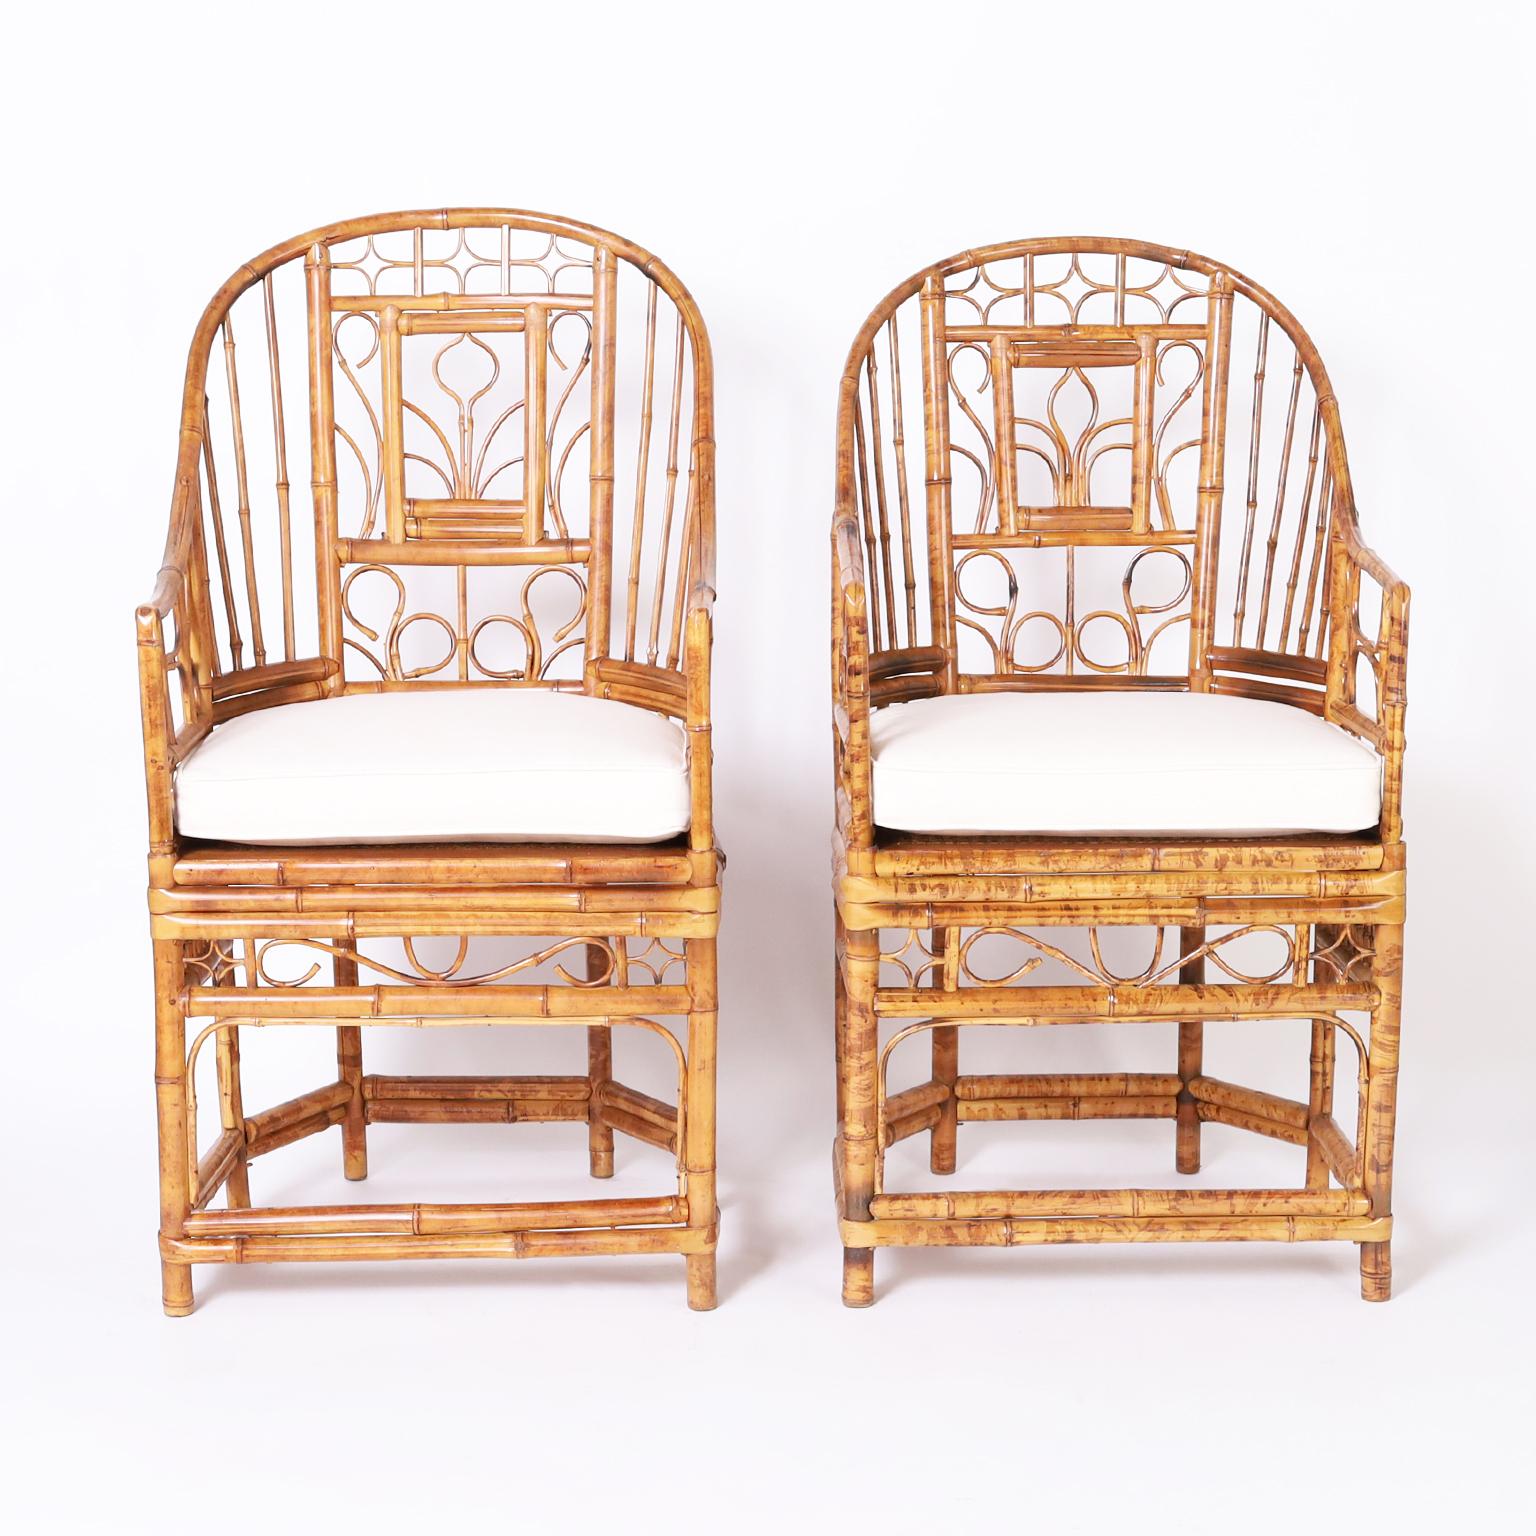 In vogue near pair of Brighton Pavilion style chairs handcrafted in bamboo in the iconic Chippendale form with caned seats.

Left: H: 43 W: 22 D: 20 Seat: 22
Right: H: 41.5 W: 22 D: 20 Seat: 22